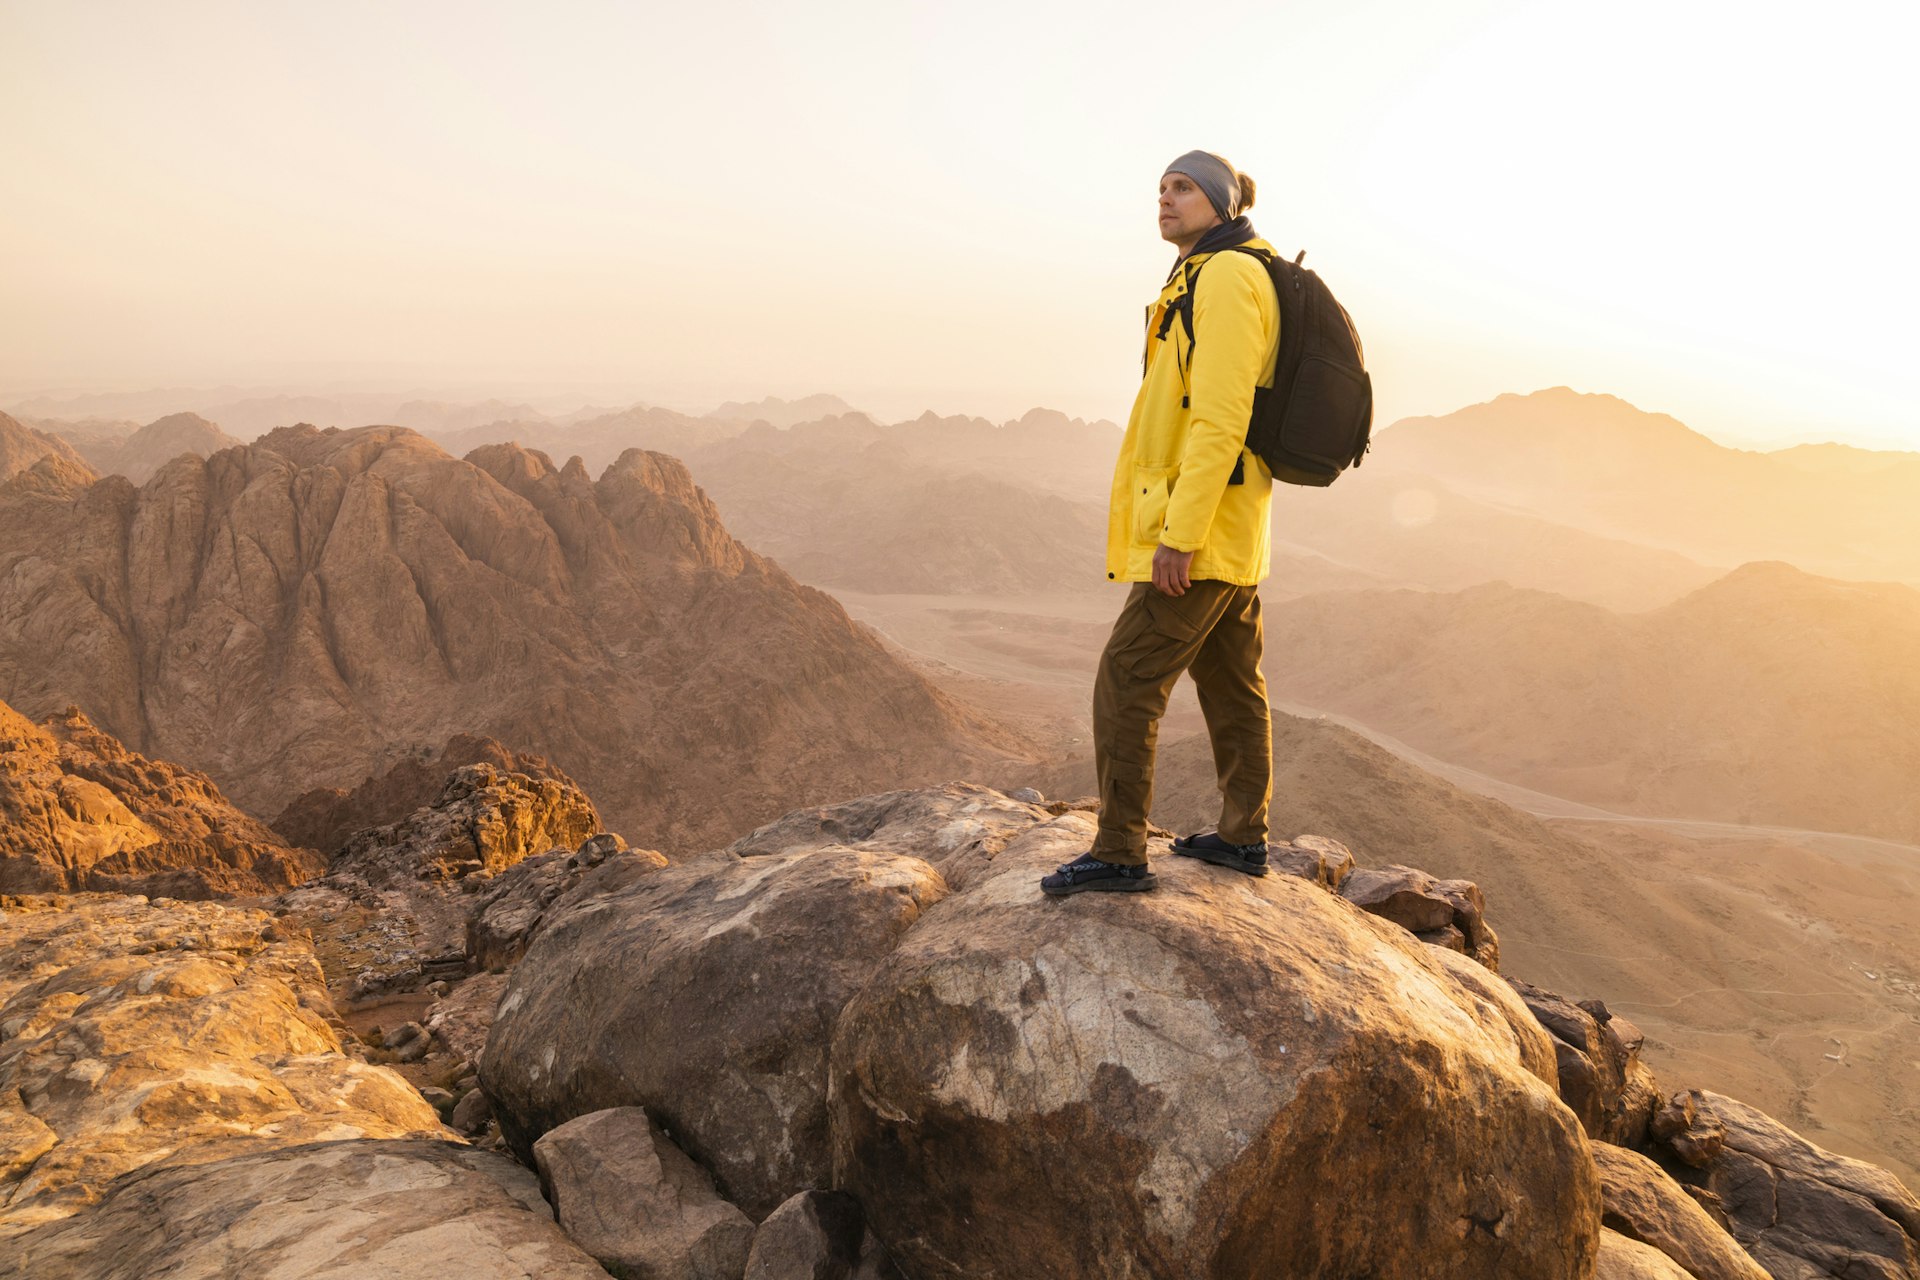 A hiker in a bright yellow coat with a black rucksack stands at the top of a mountain in Sinai, Egypt